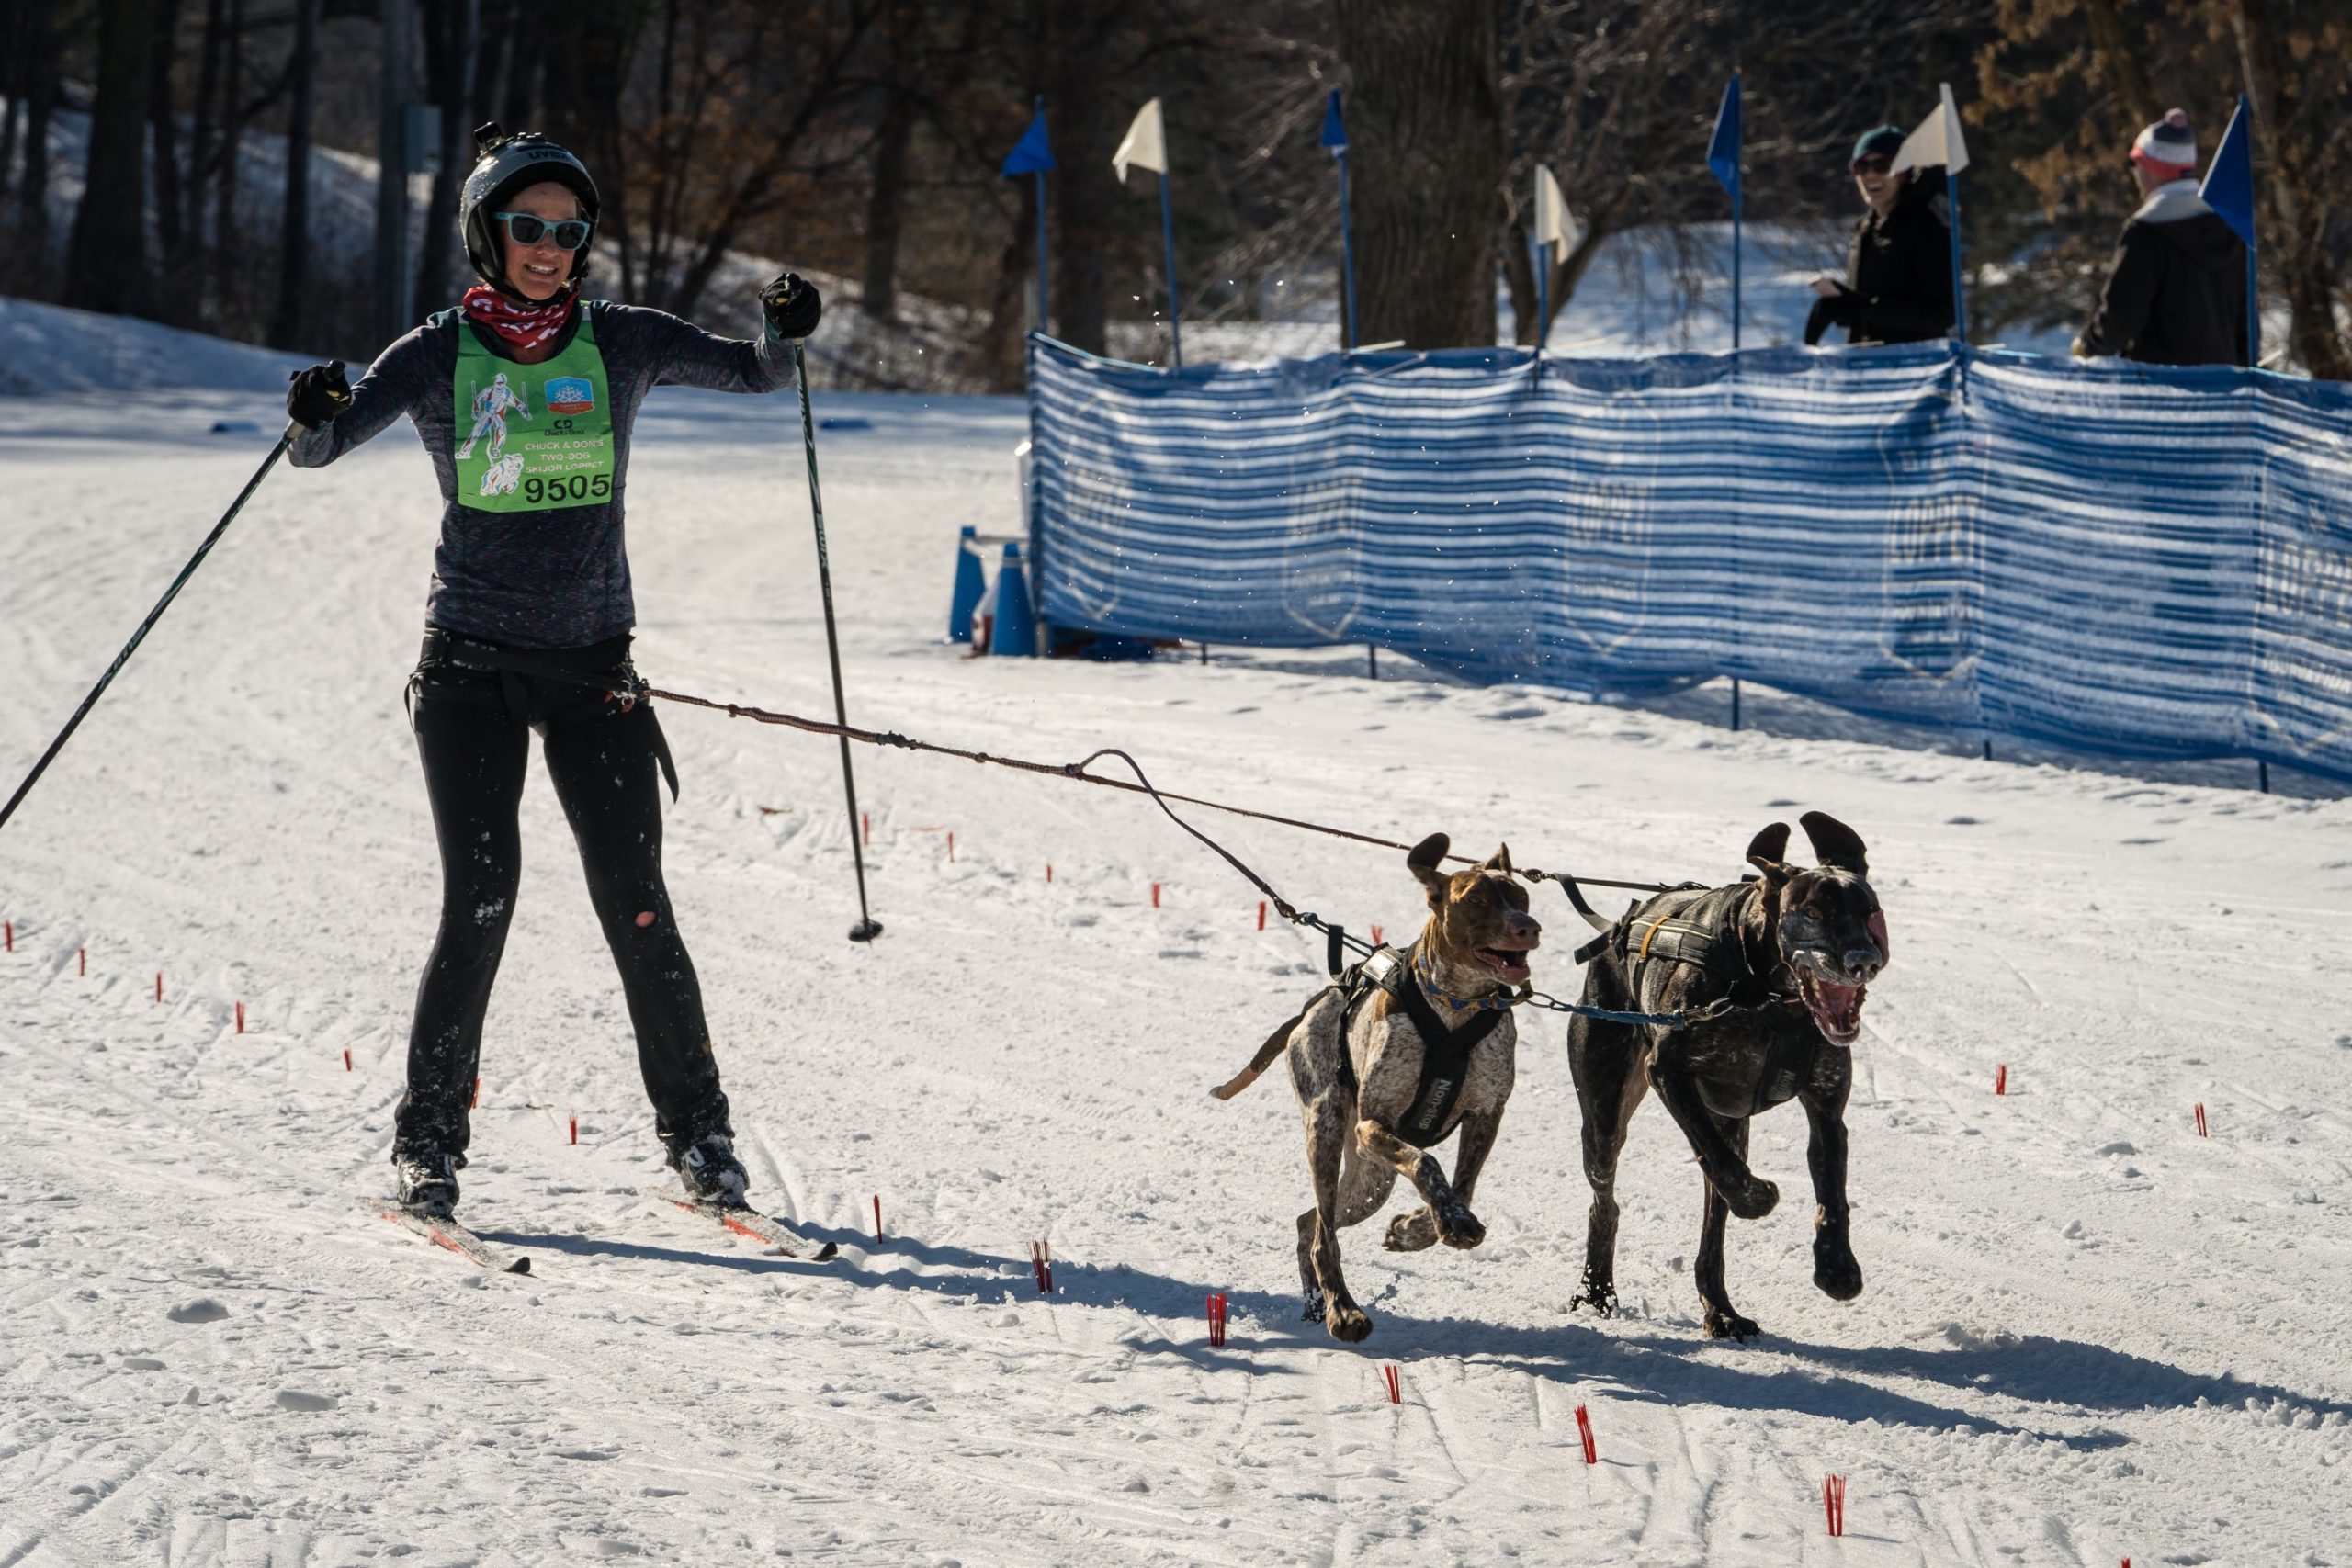 woman competing in the skijoring loppet